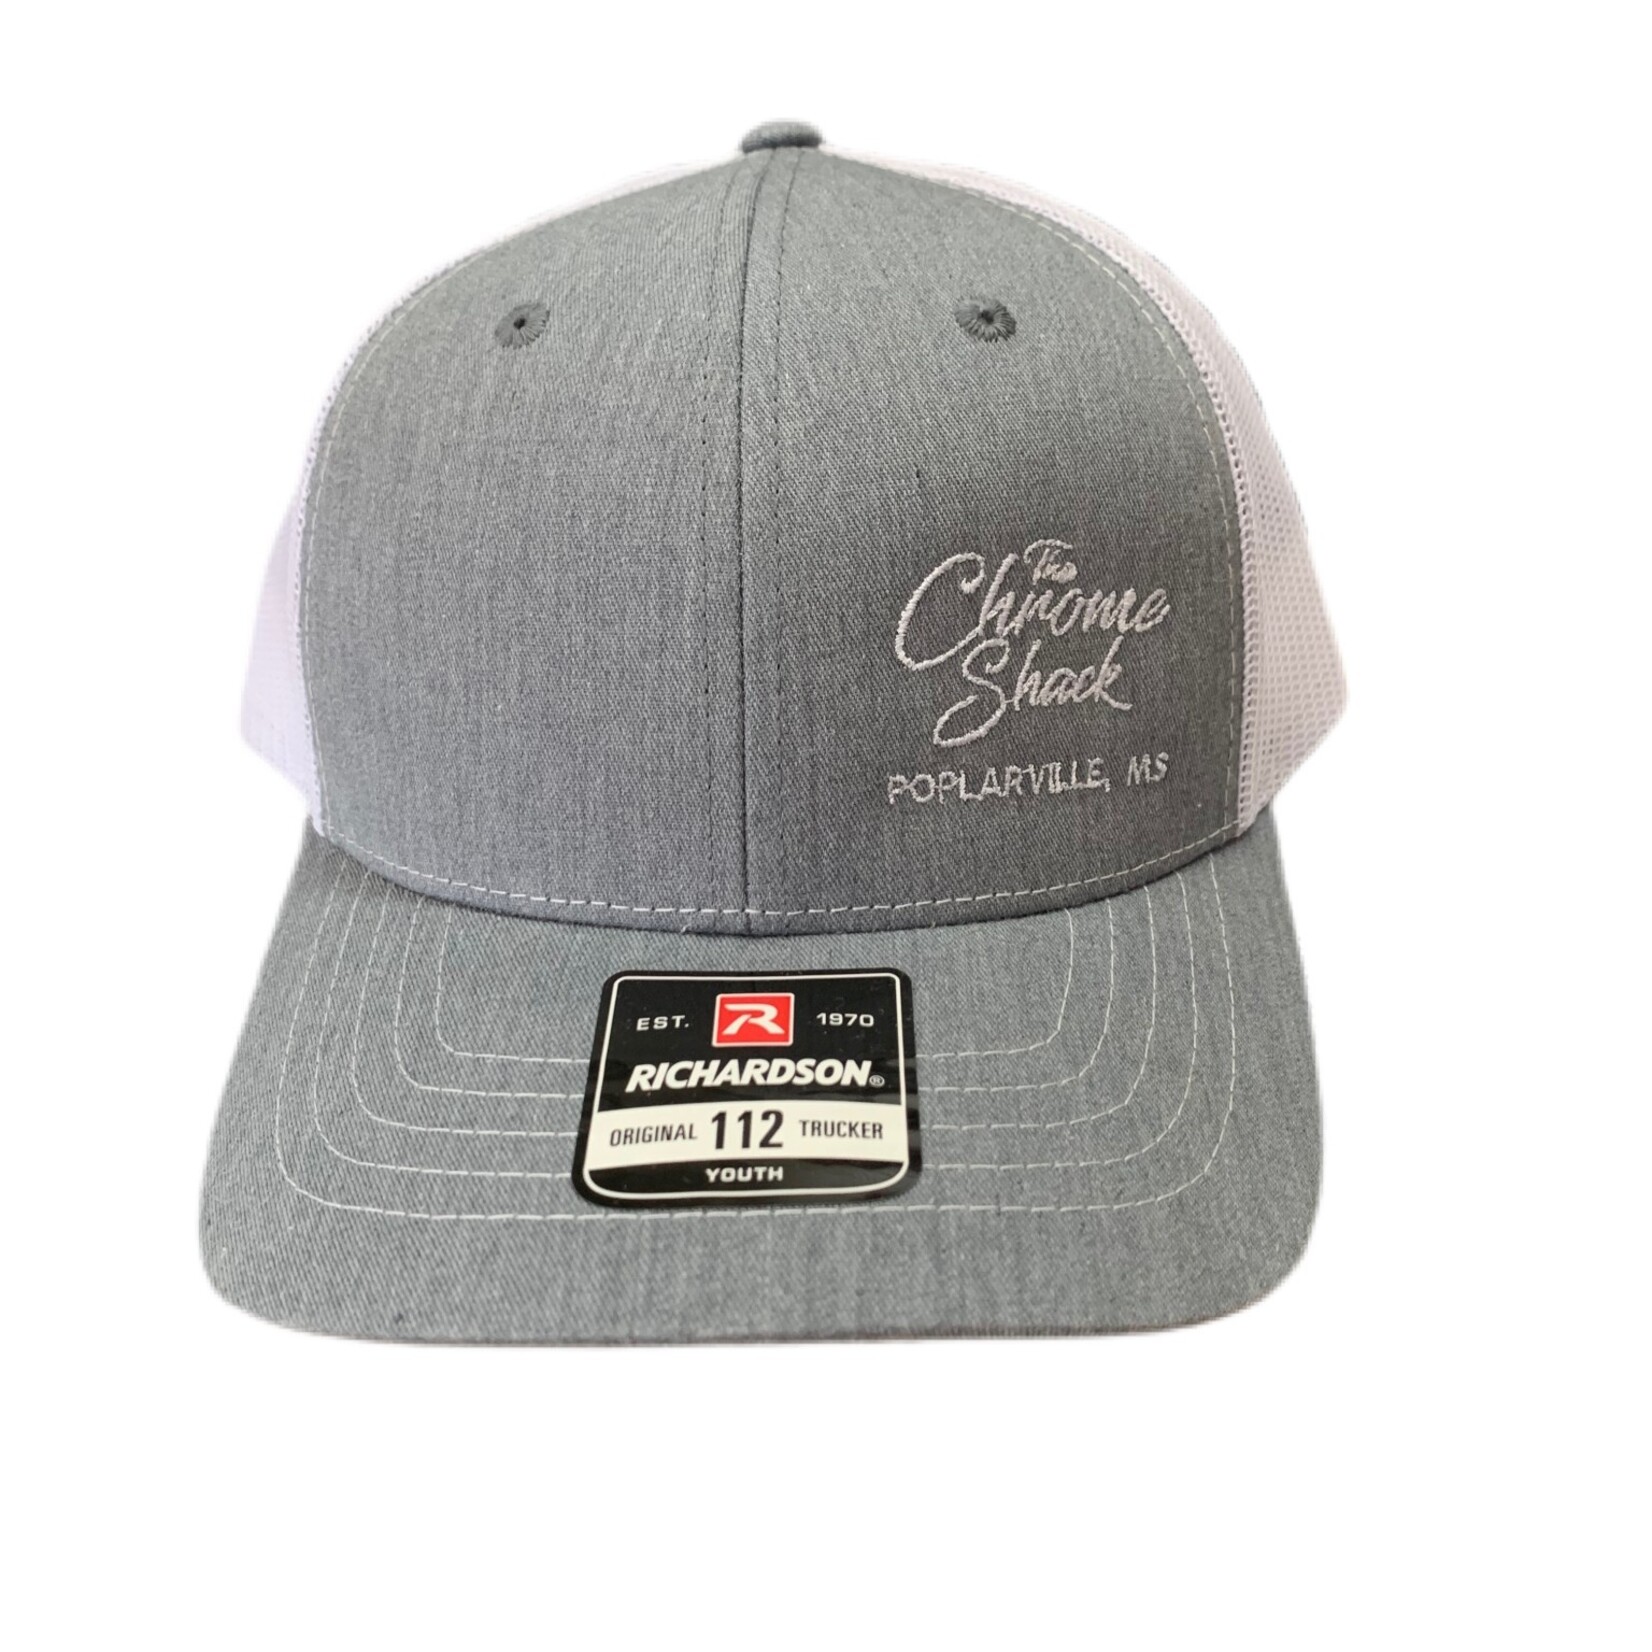 The Chrome Shack Hat - Youth Edition Heather Grey/White